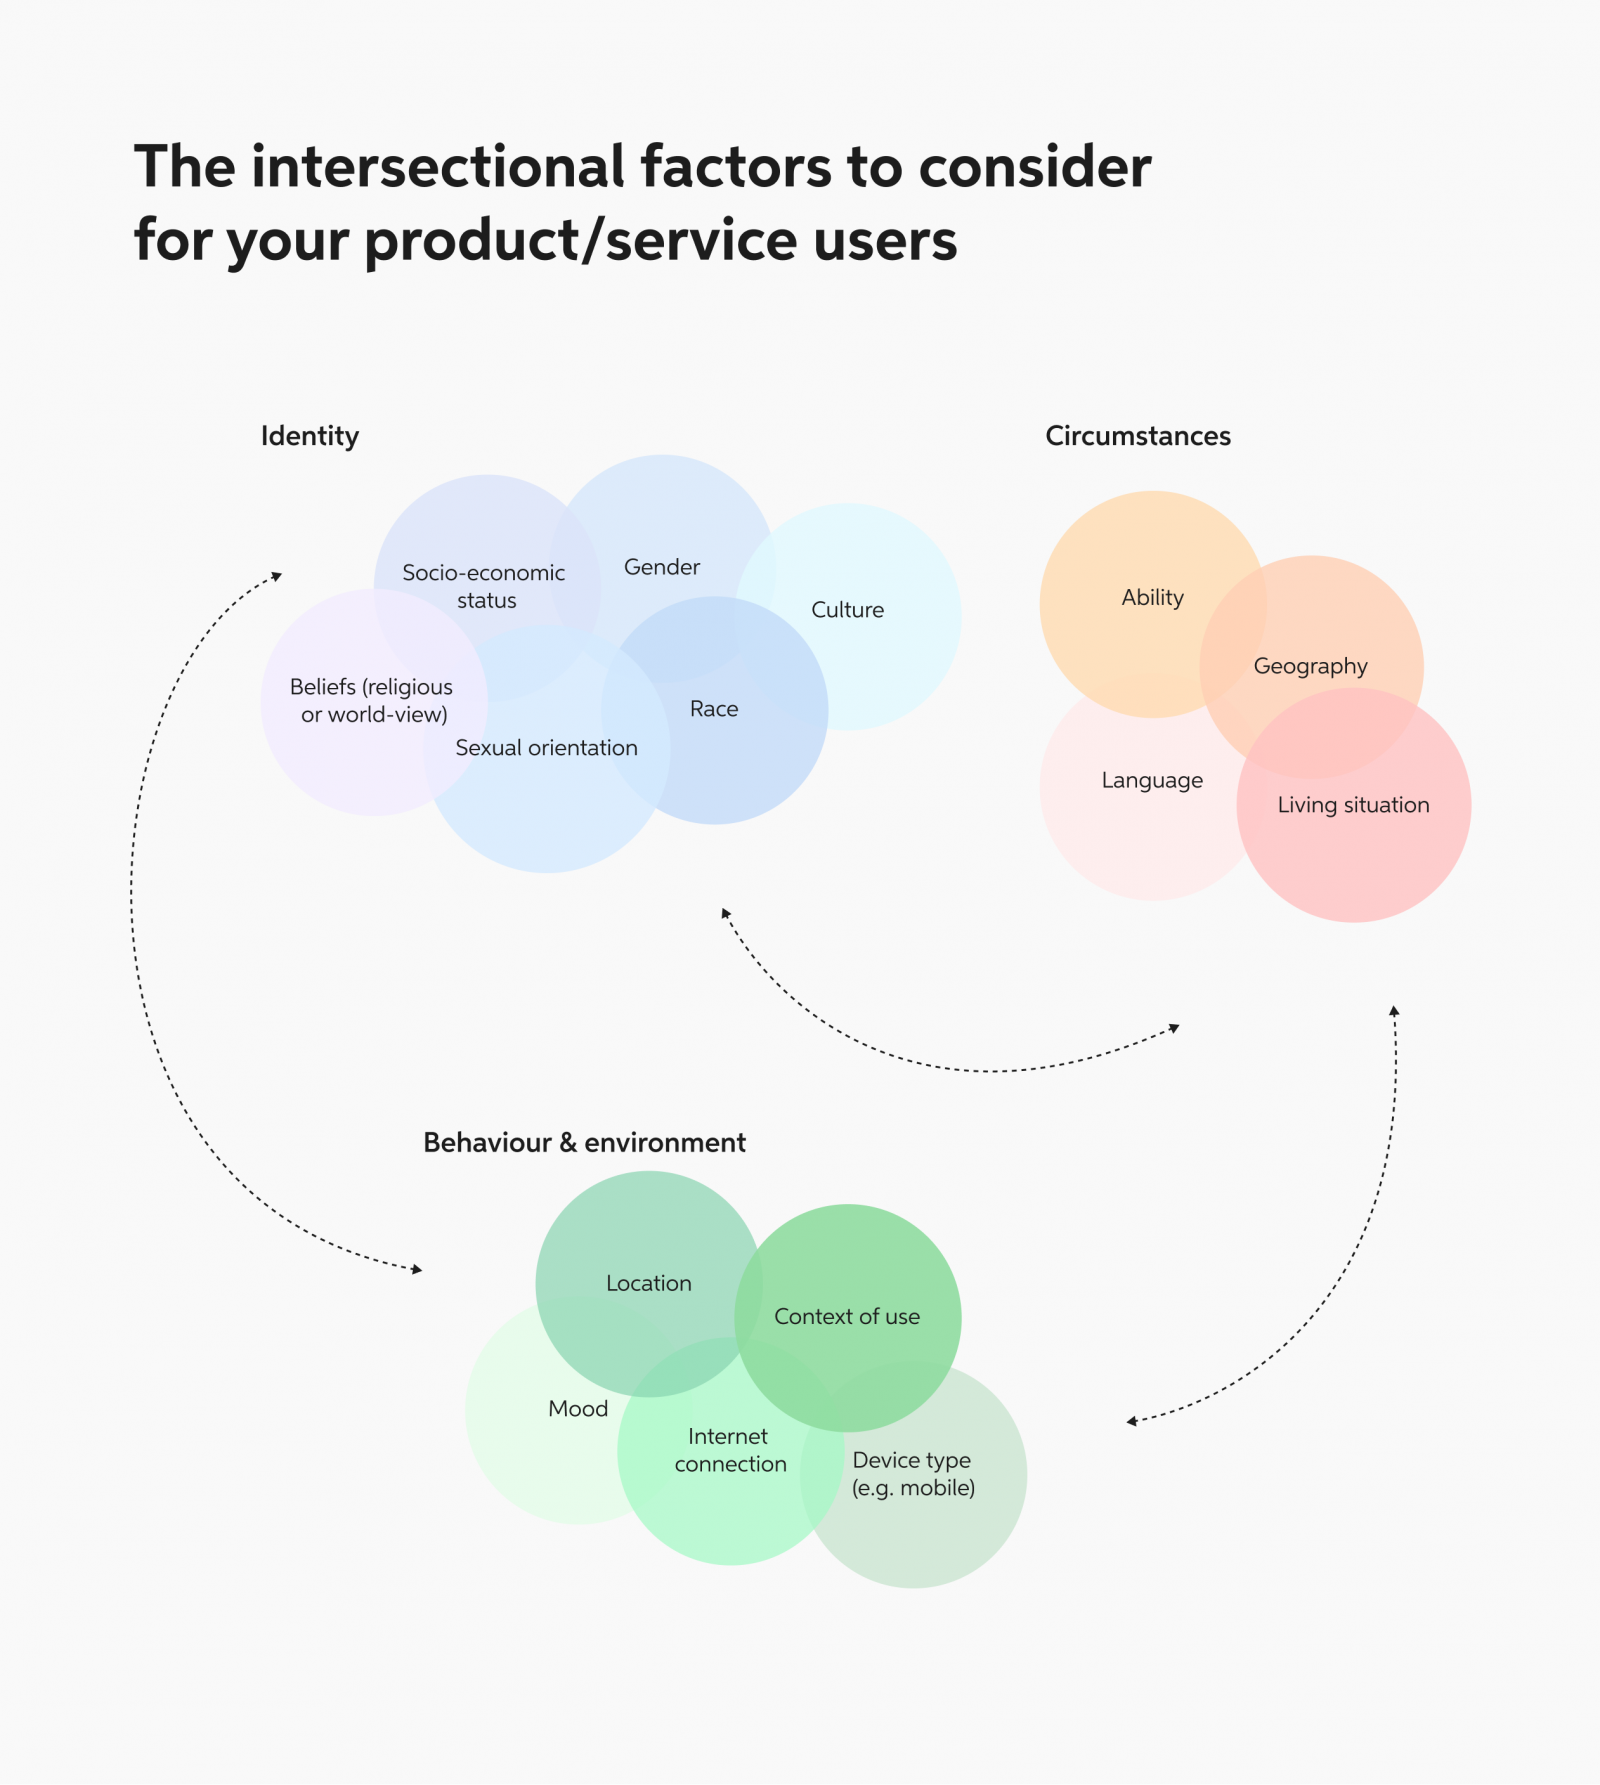 A diagram showing intersectional factors in circles, categorized by identity, behaviour, and context